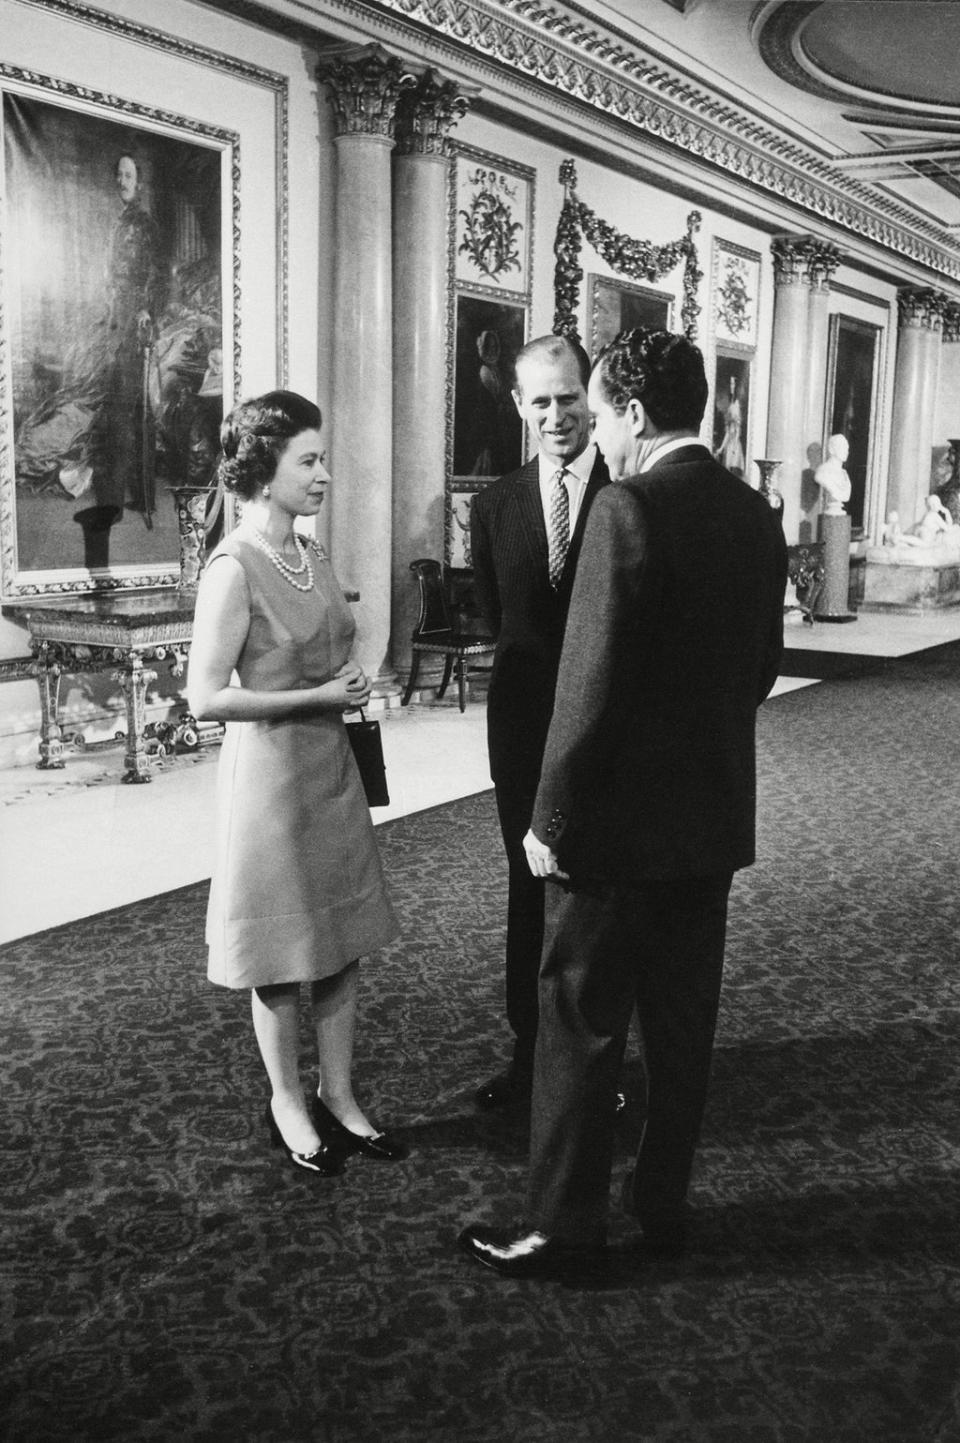 President Nixon chats with Queen Elizabeth II and Prince Phillip at Buckingham Palace, 25 February 1969 (Everett/Shutterstock)